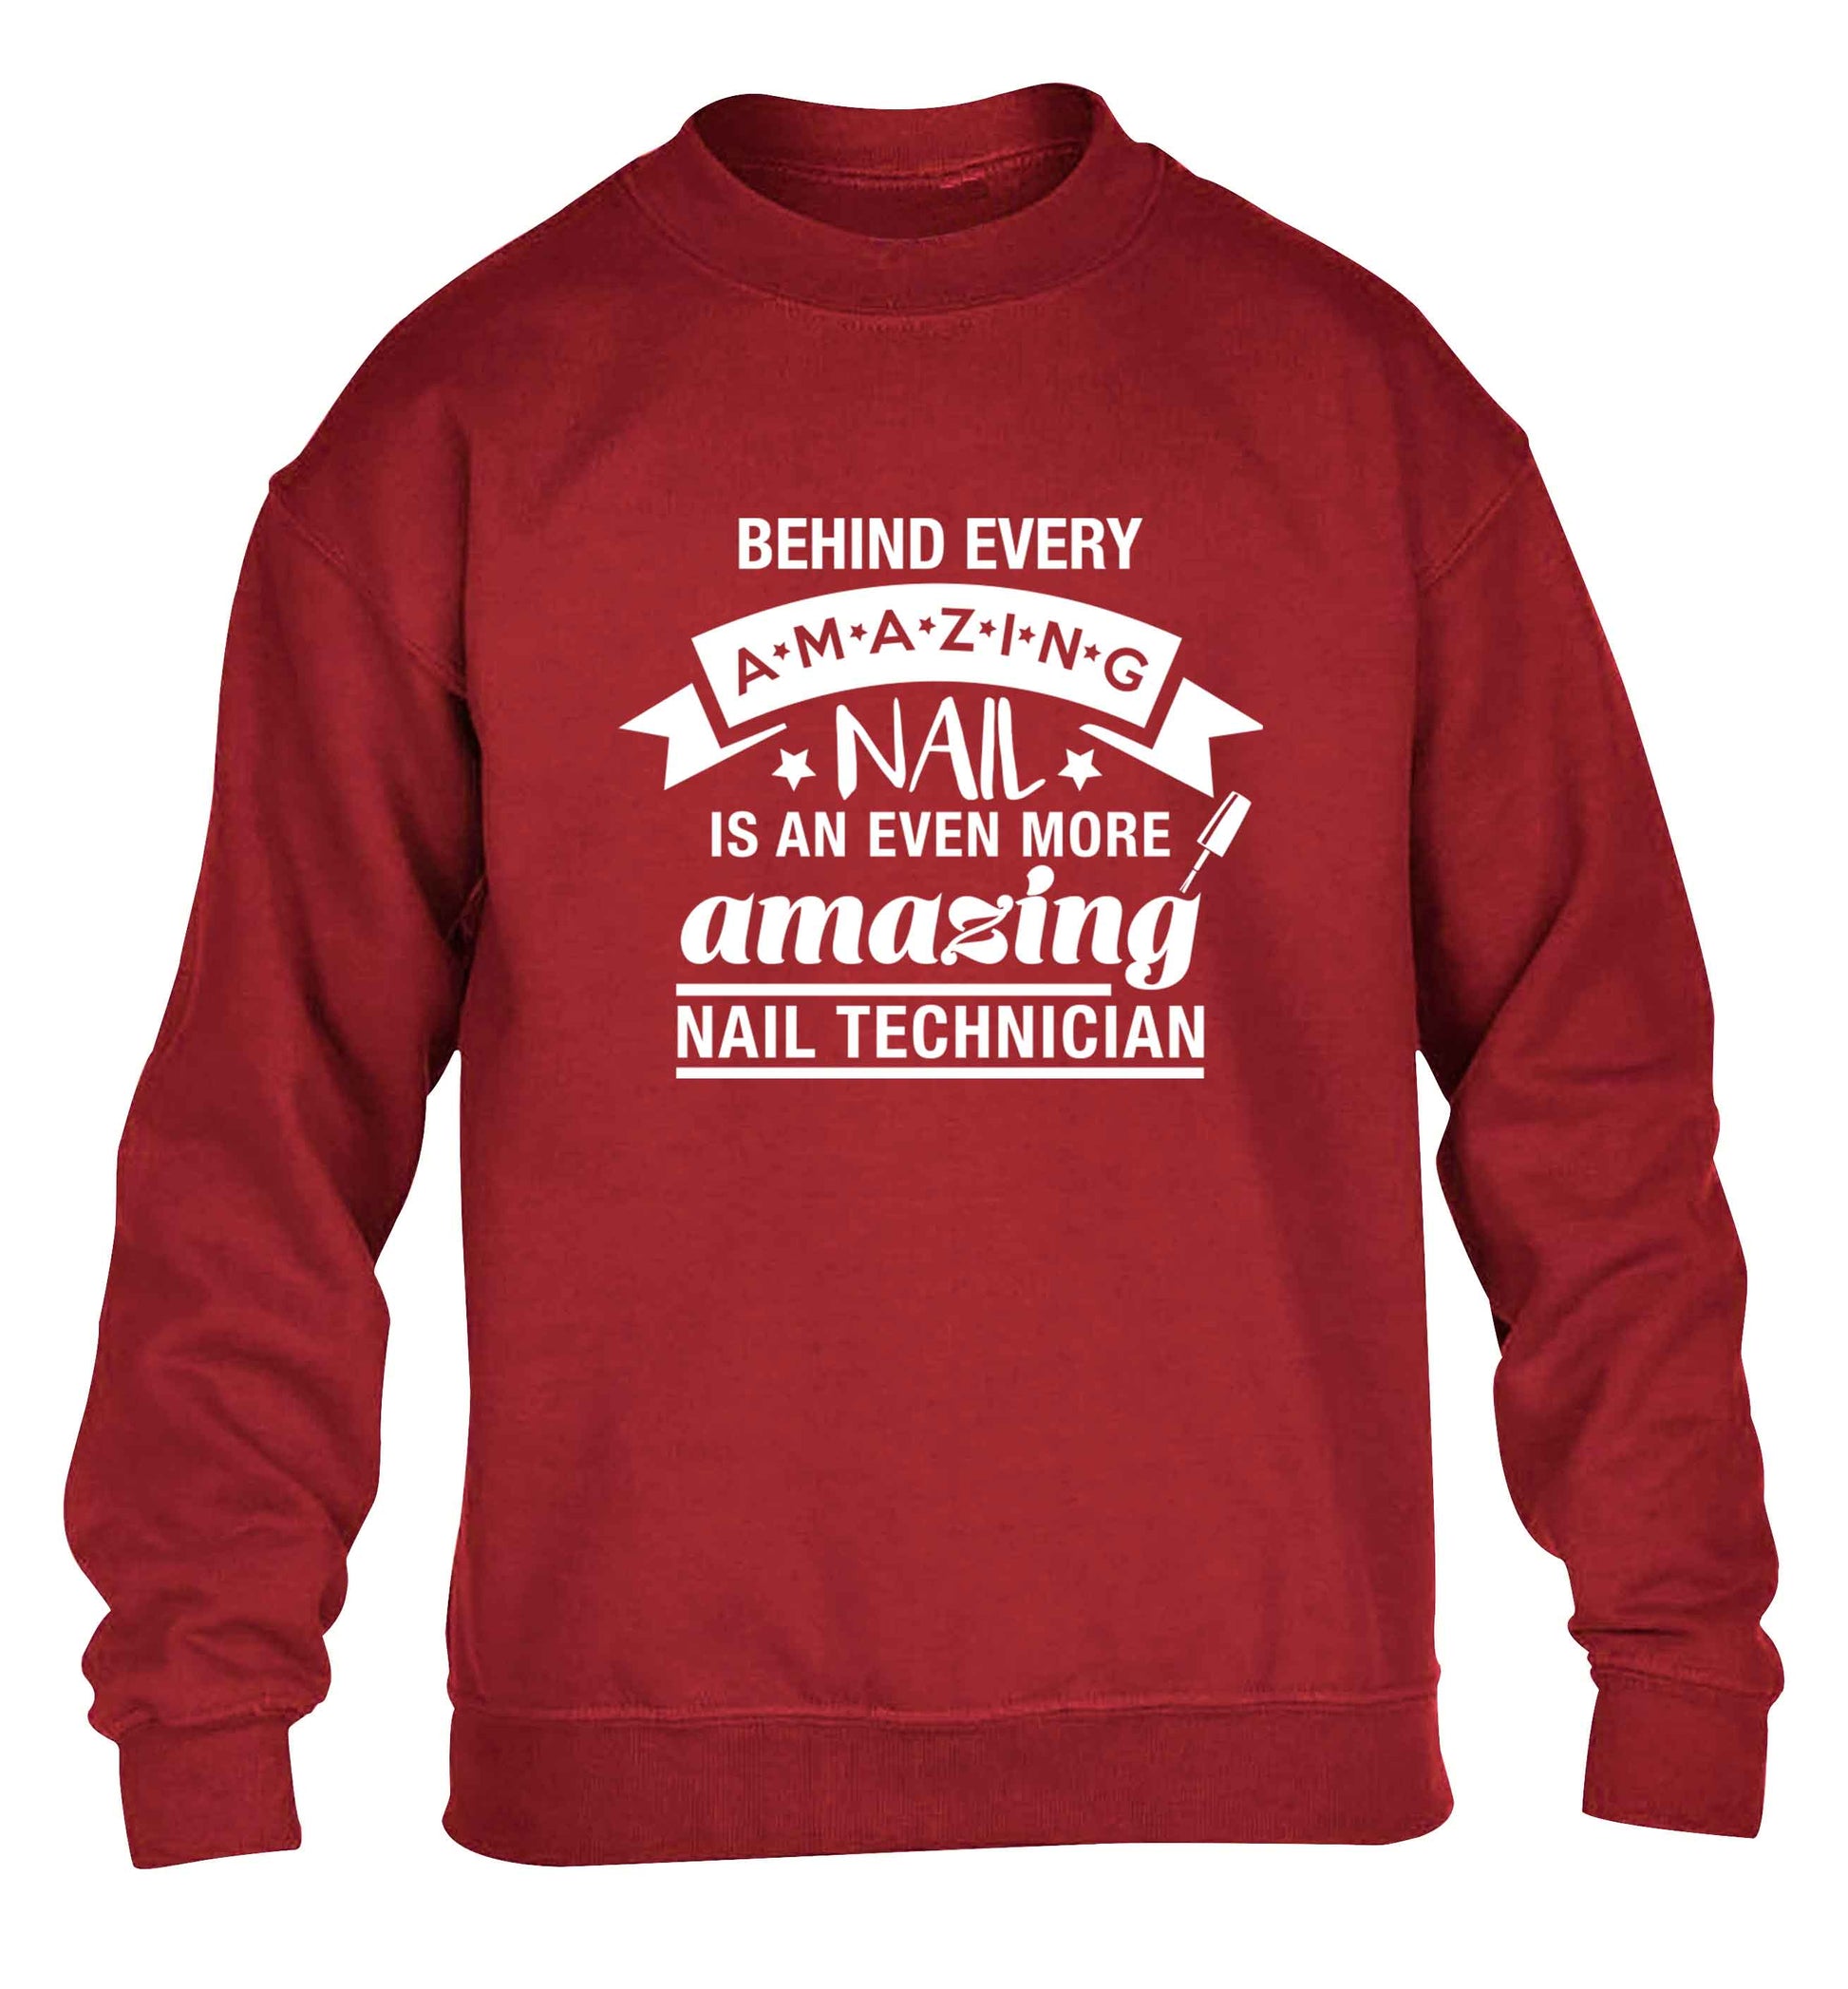 Behind every amazing nail is an even more amazing nail technician children's grey sweater 12-13 Years